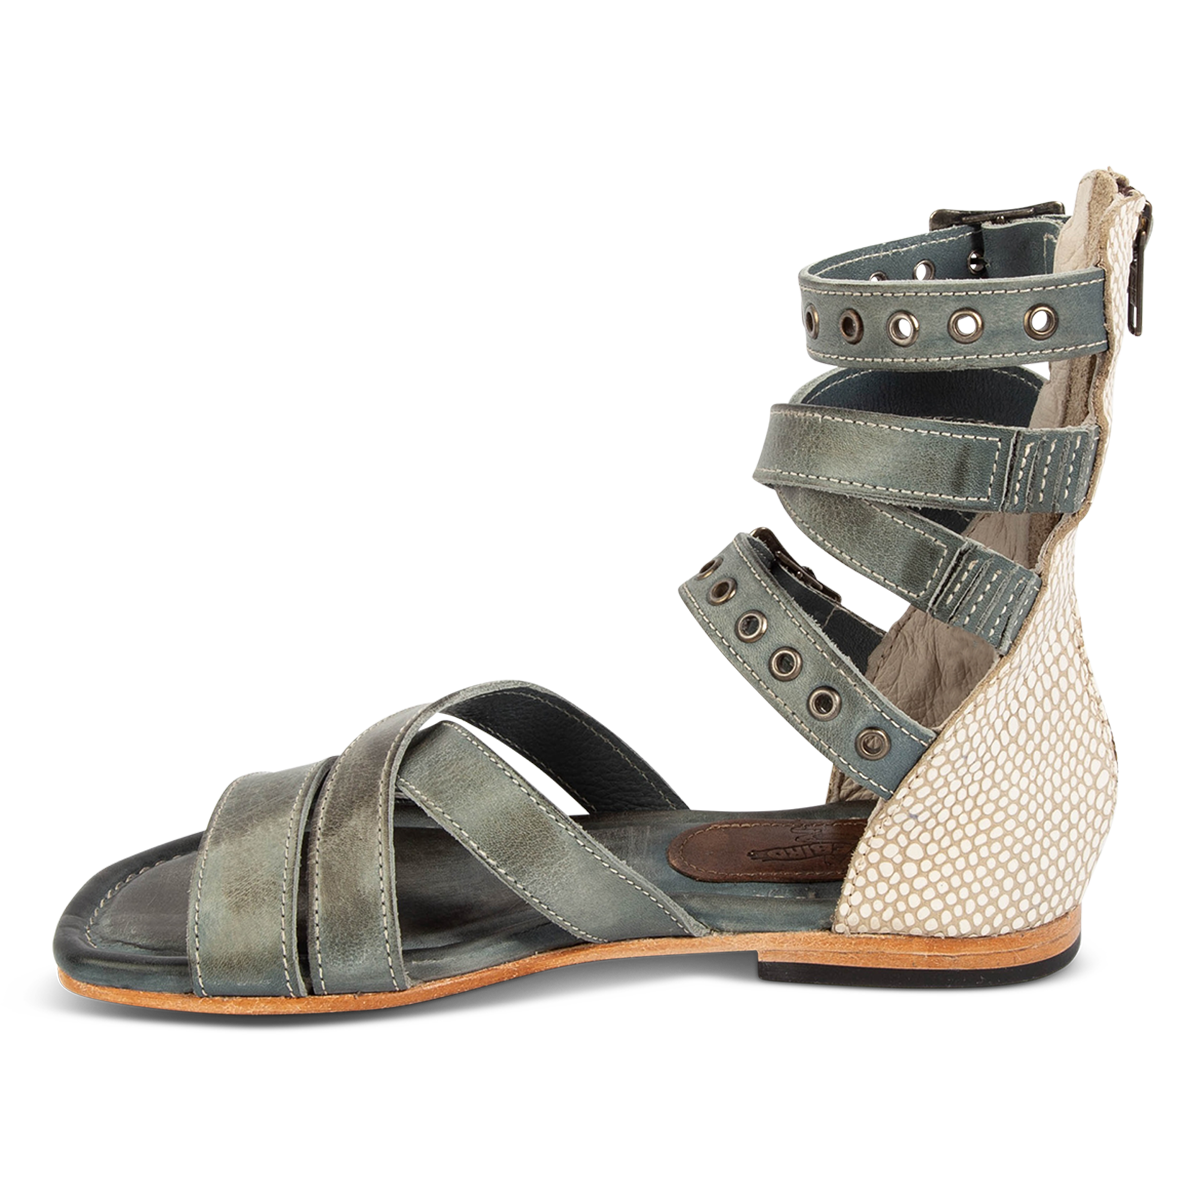 Inside view showing FREEBIRD women's Sydney blue multi leather gladiator sandal with adjustable leather straps and a contrasting back panel